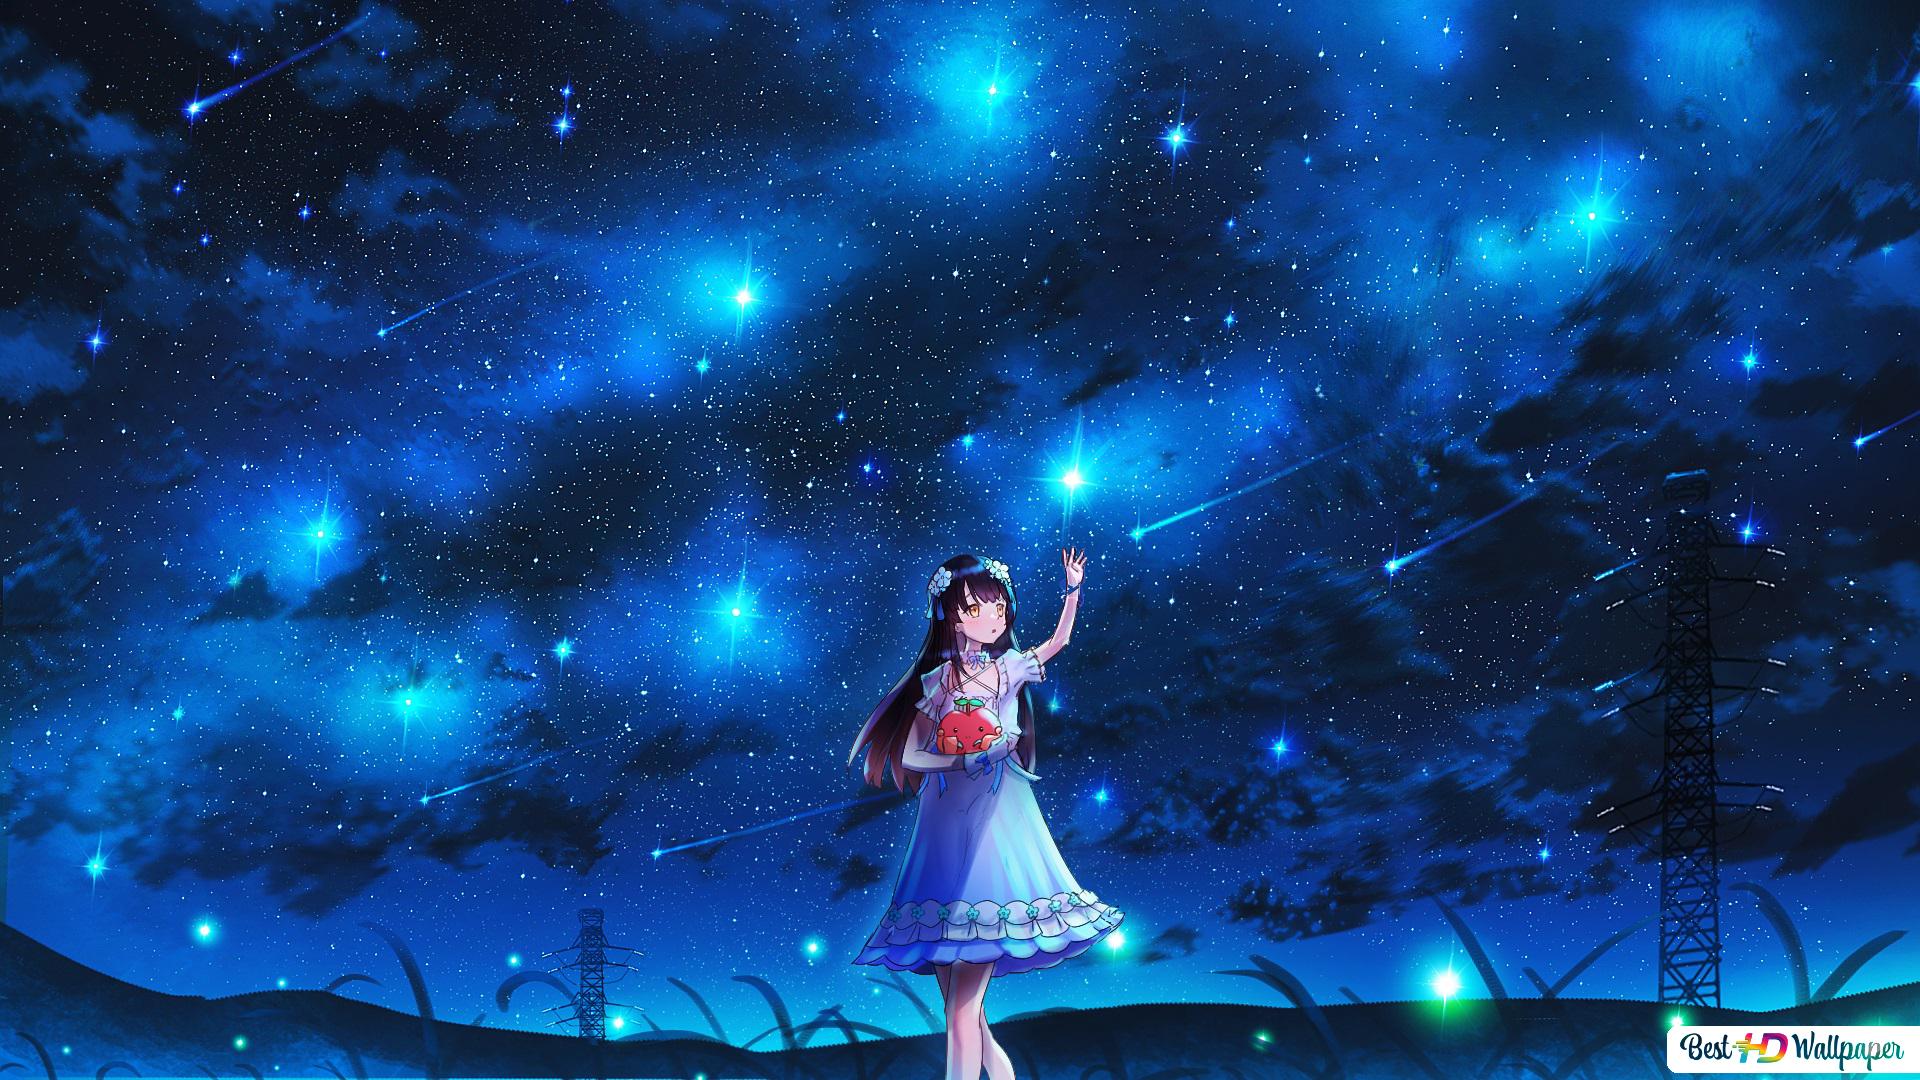 Catching The Stars Wallpapers